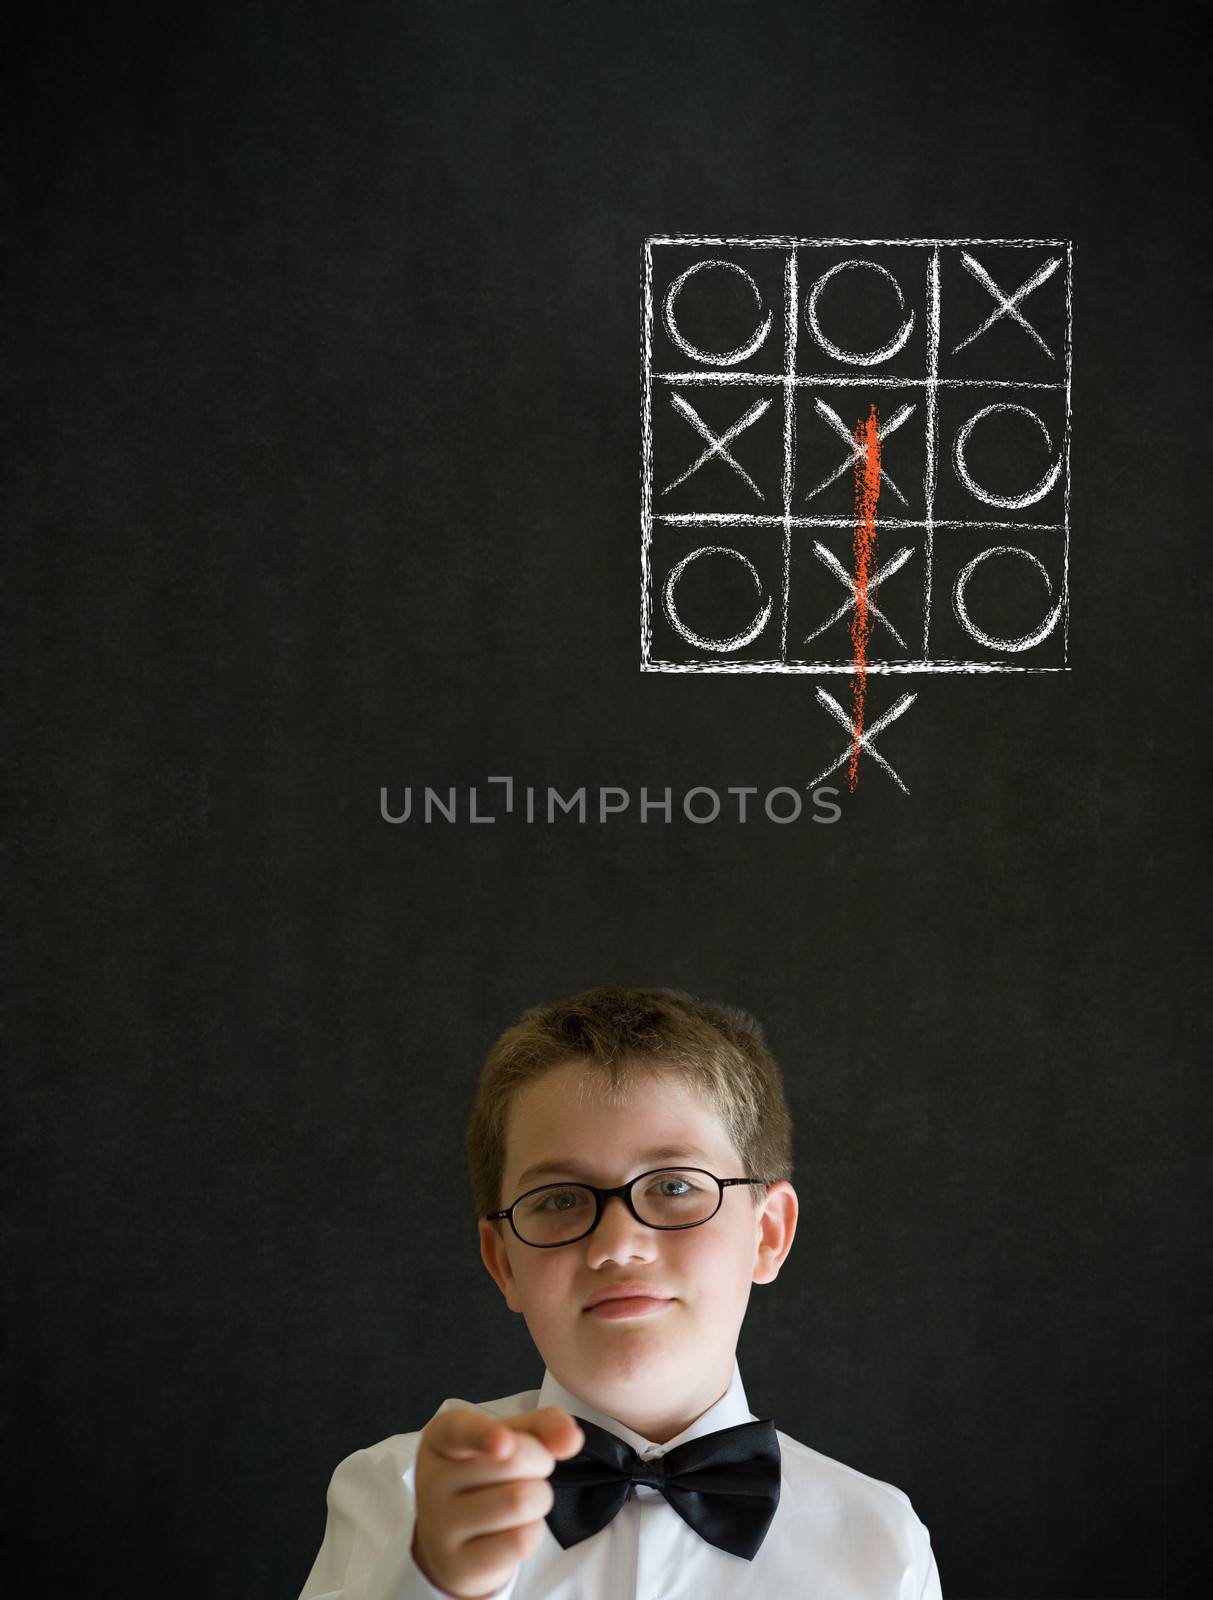 Education needs you thinking boy business man with thinking out of the box tic tac toe concept by alistaircotton